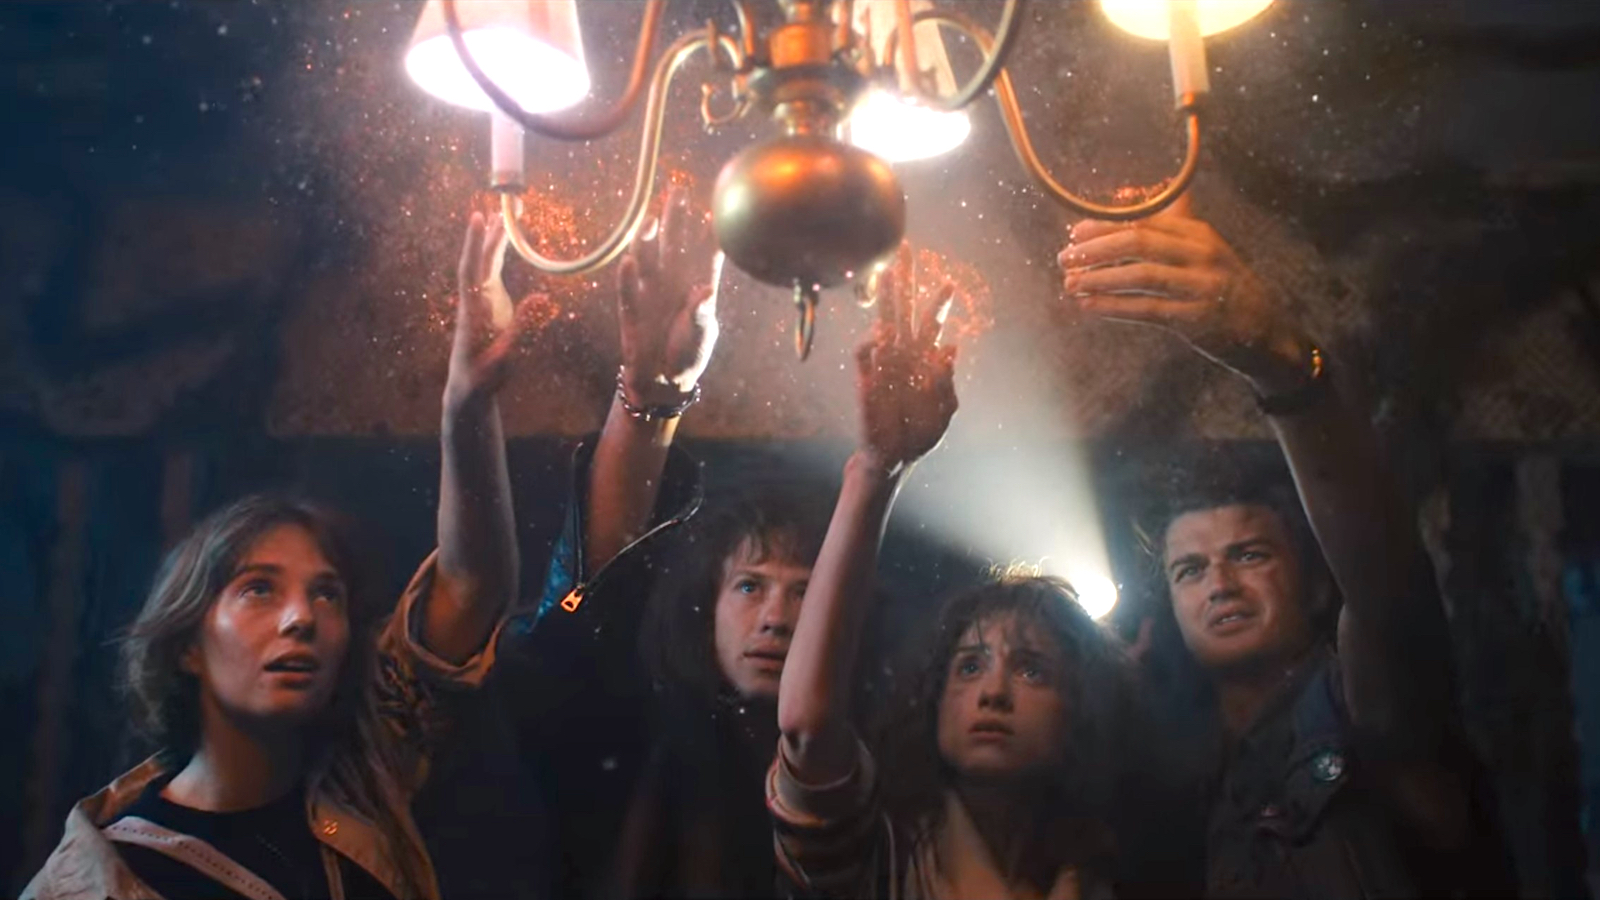 Robin, Eddie, Nancy and Mike from Stranger Things reach for a burning chandelier that's emitting glittering dust